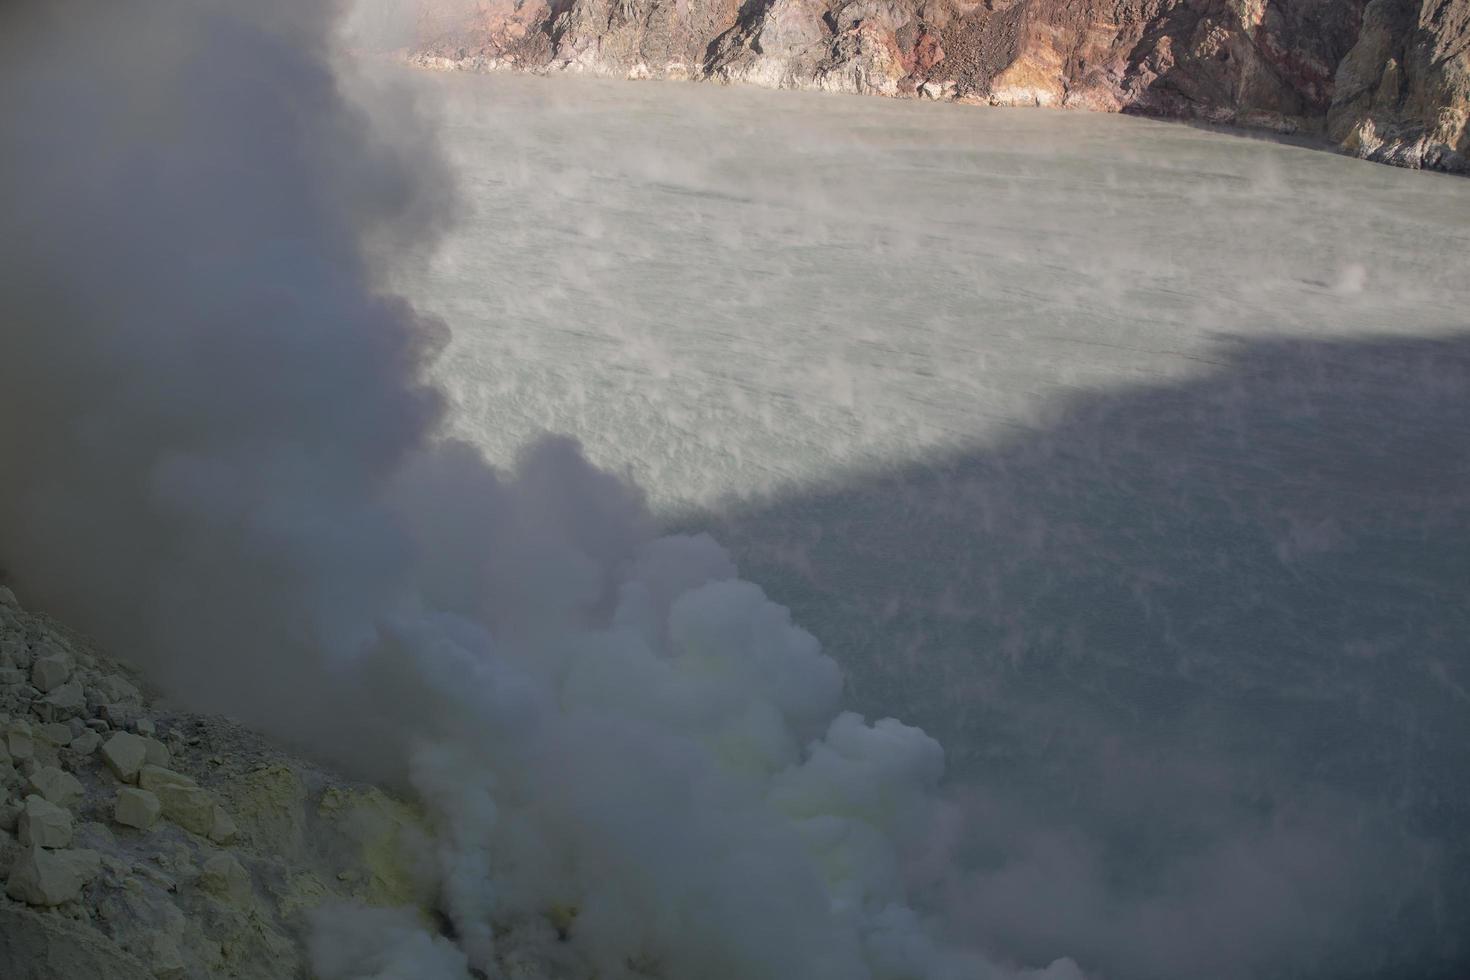 Sulfur fumes from the crater of Kawah Ijen Volcano, Indonesia photo